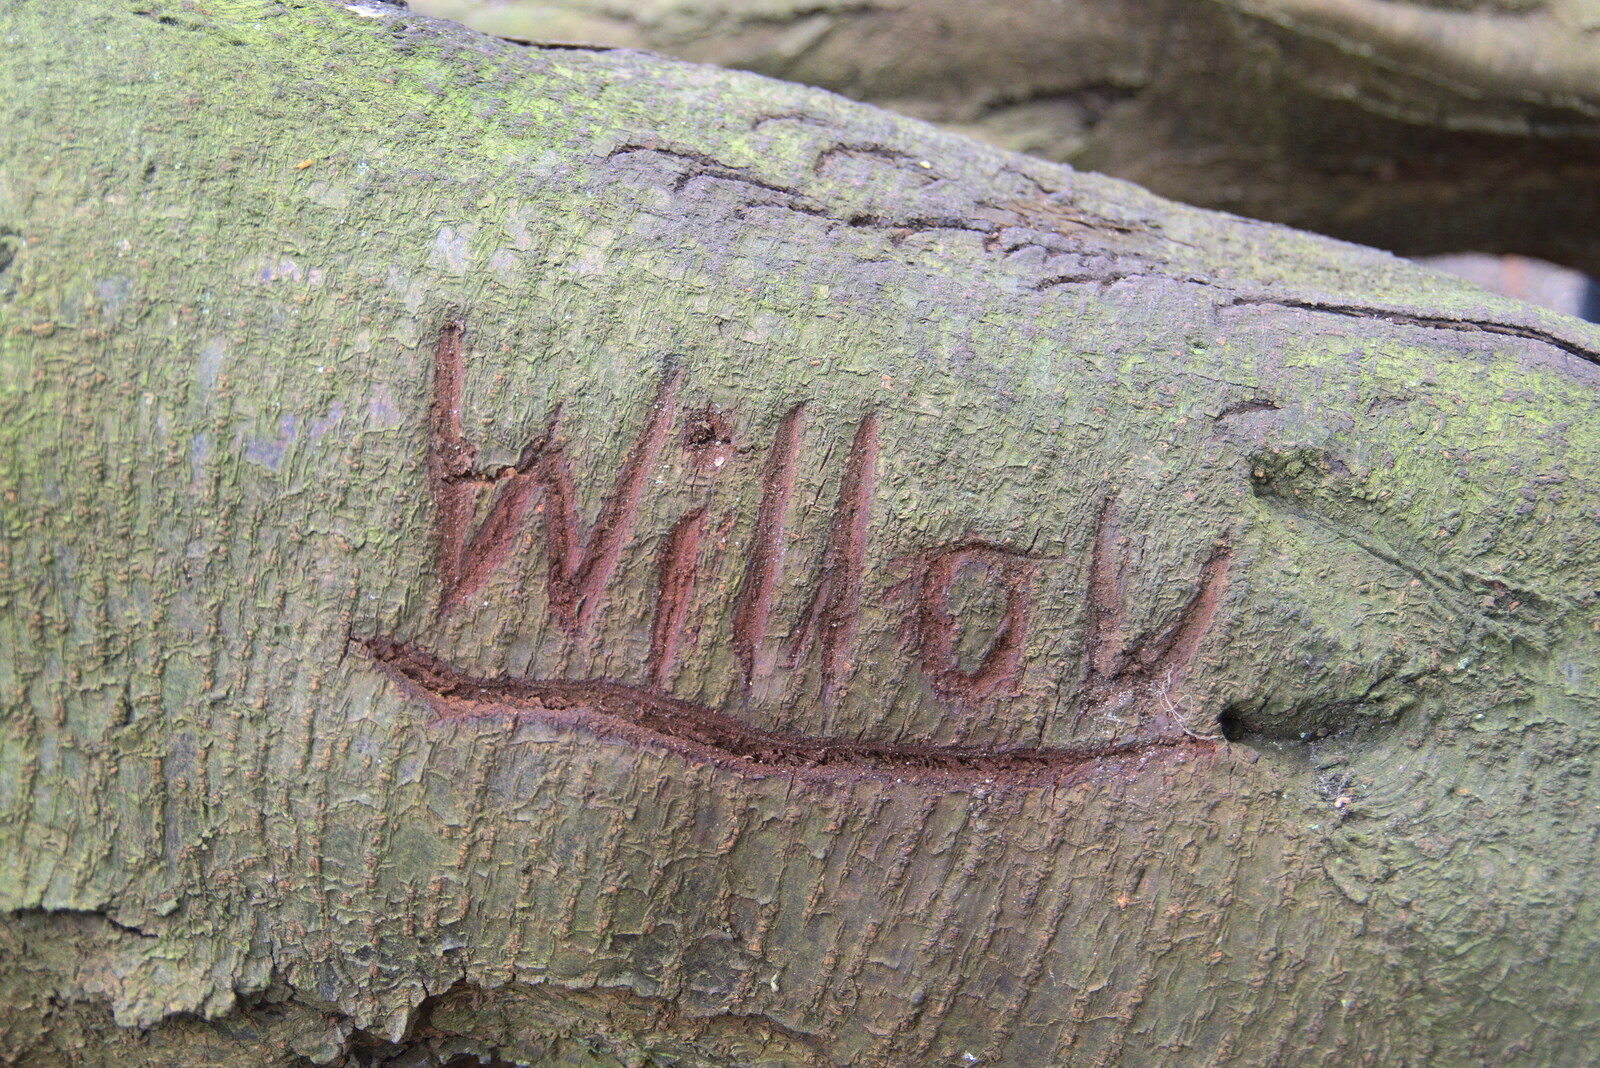 Someone called Willow has been carving trees from Another Walk on Eye Airfield, Eye, Suffolk - 14th March 2021